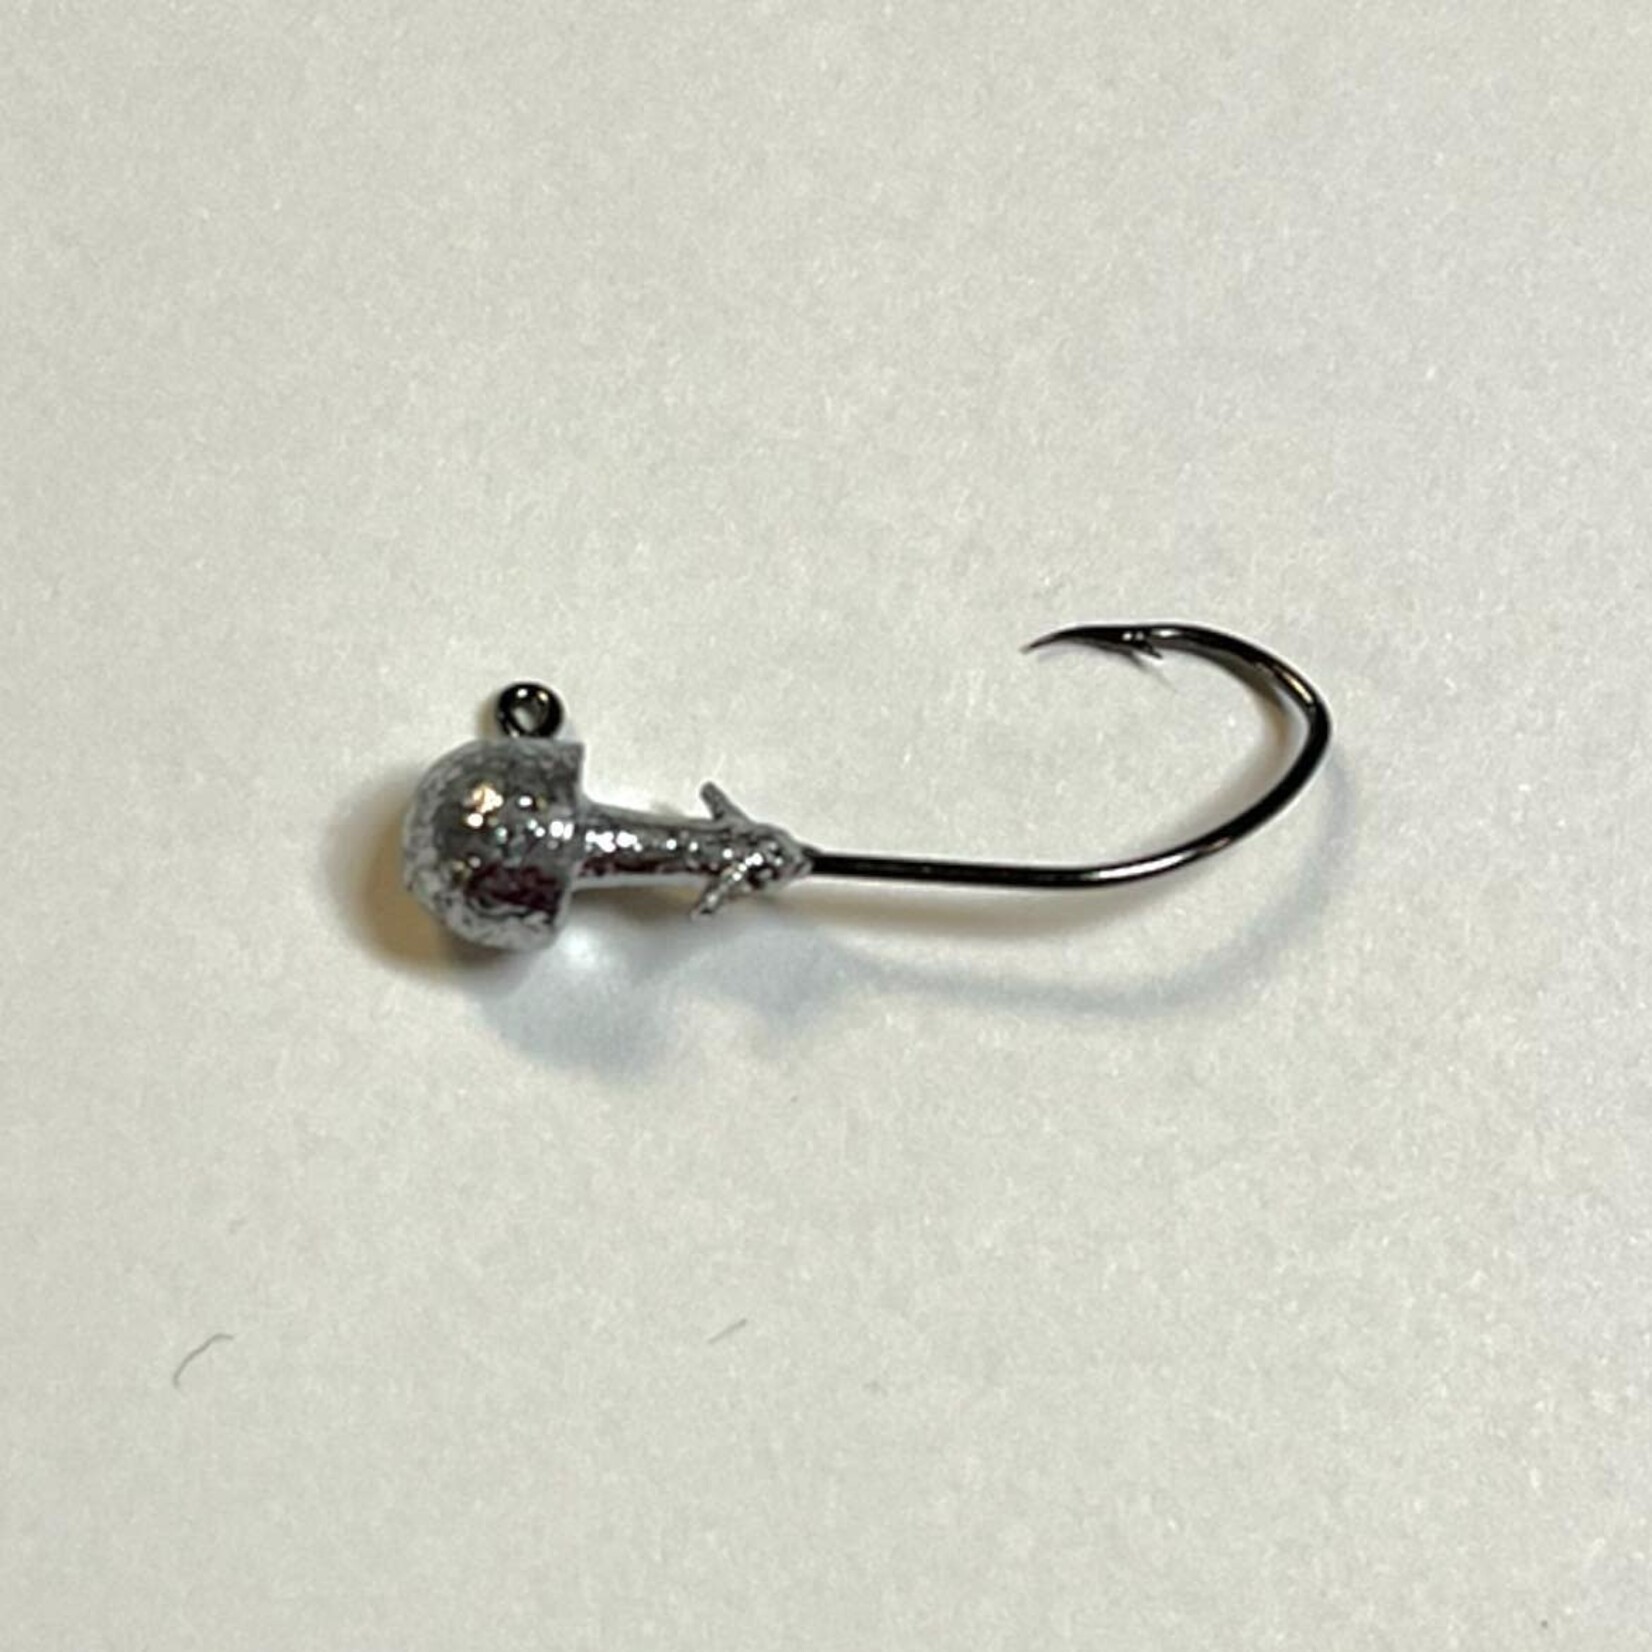 Rogers Worm Nose Hook